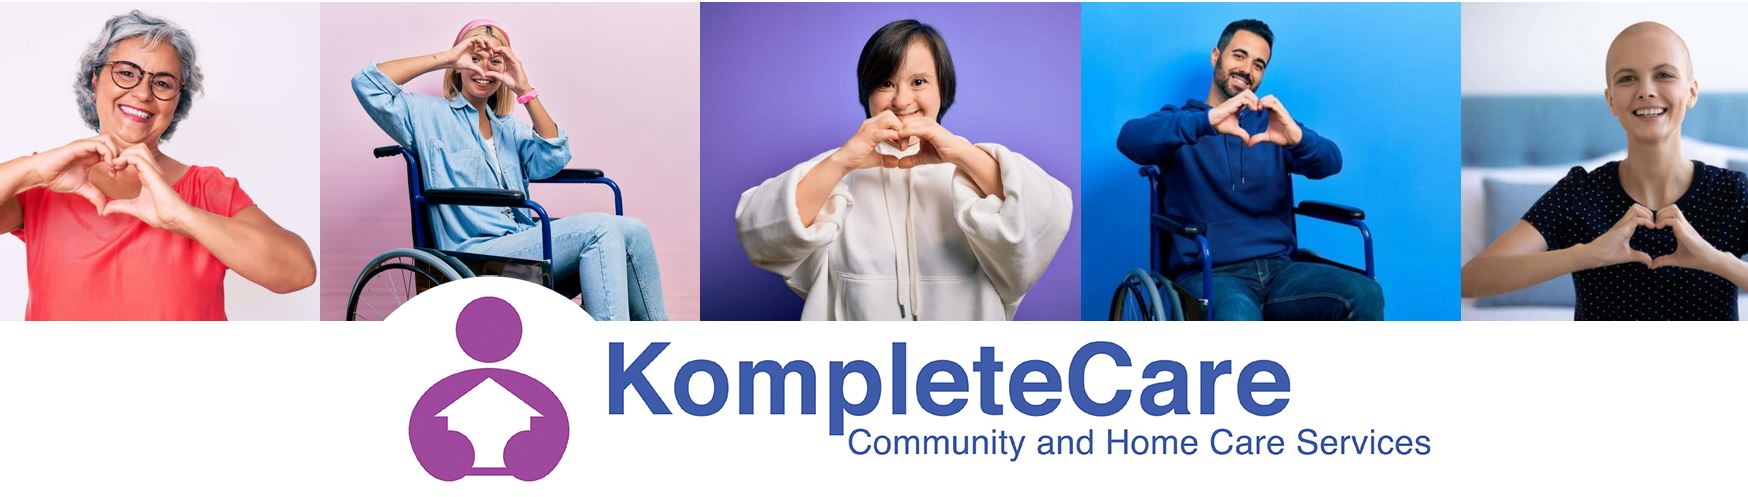 Support Workers Training in Adelaide KC Skills Centre KompleteCare 